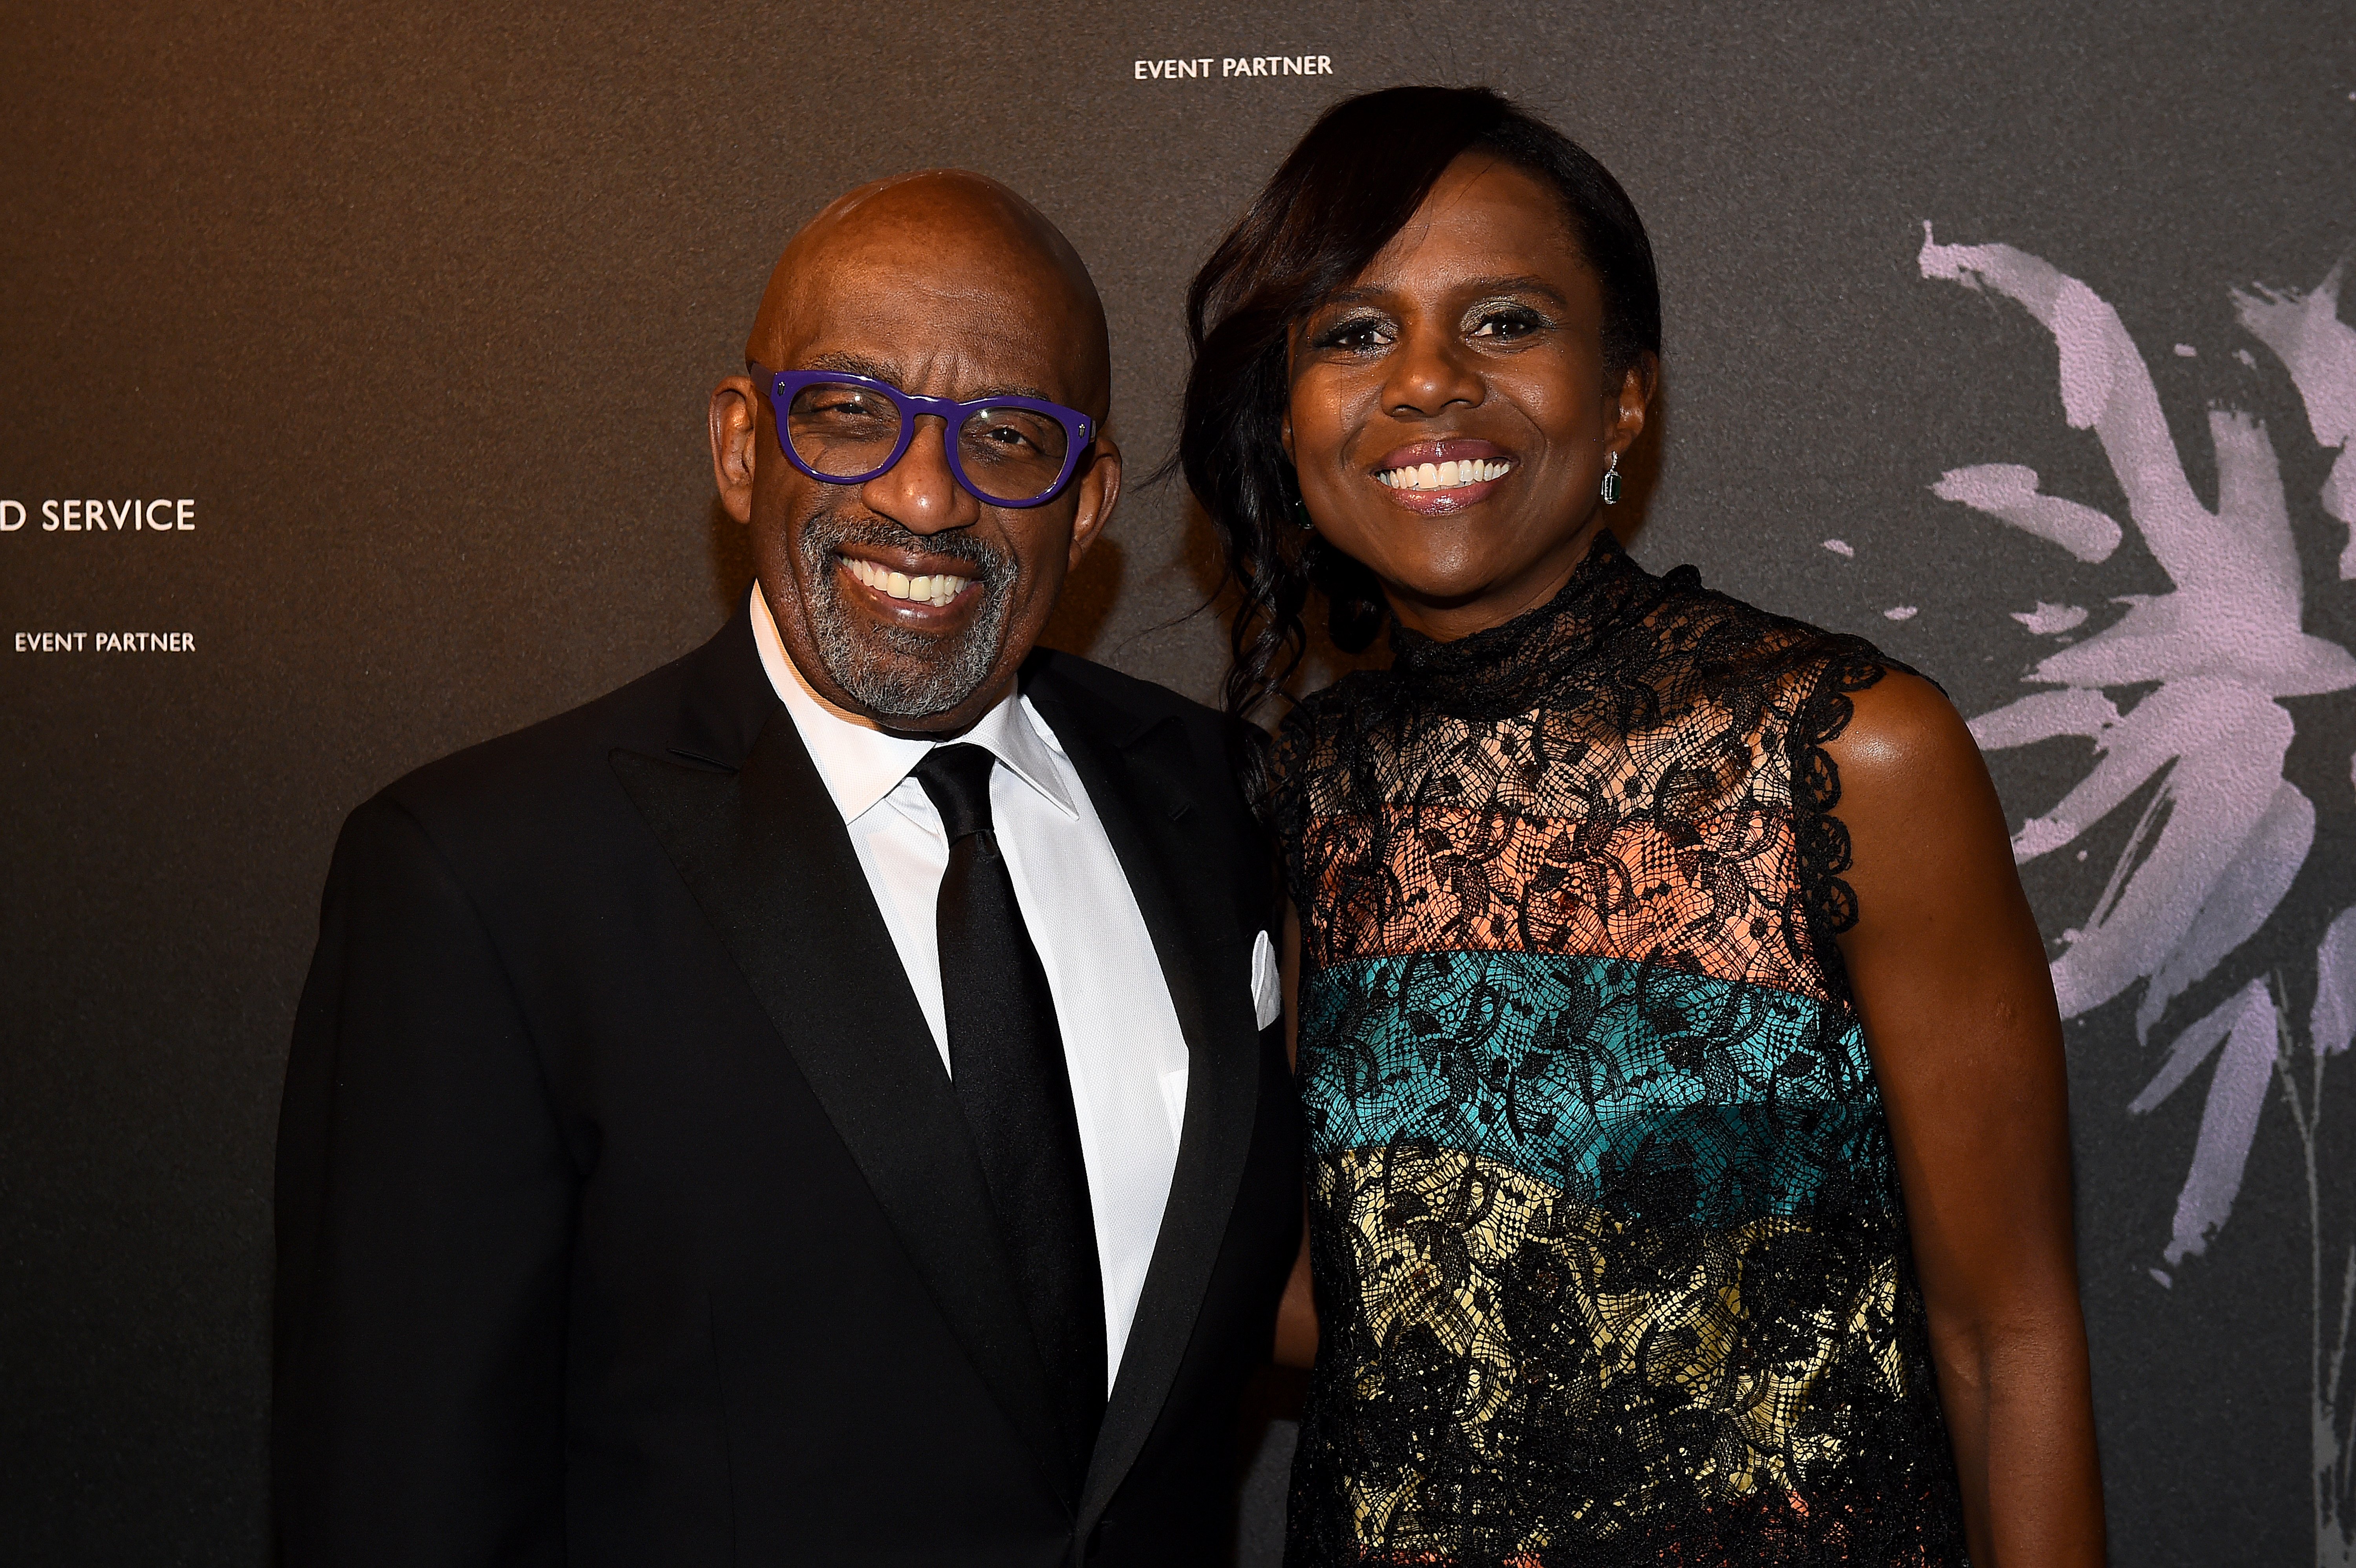 Al Roker and Deborah Roberts attend the Fourth Annual Berggruen Prize Gala celebrating 2019 Laureate Supreme Court Justice Ruth Bader Ginsburg in New York City on December 16, 2019 in New York City | Source: Getty Images